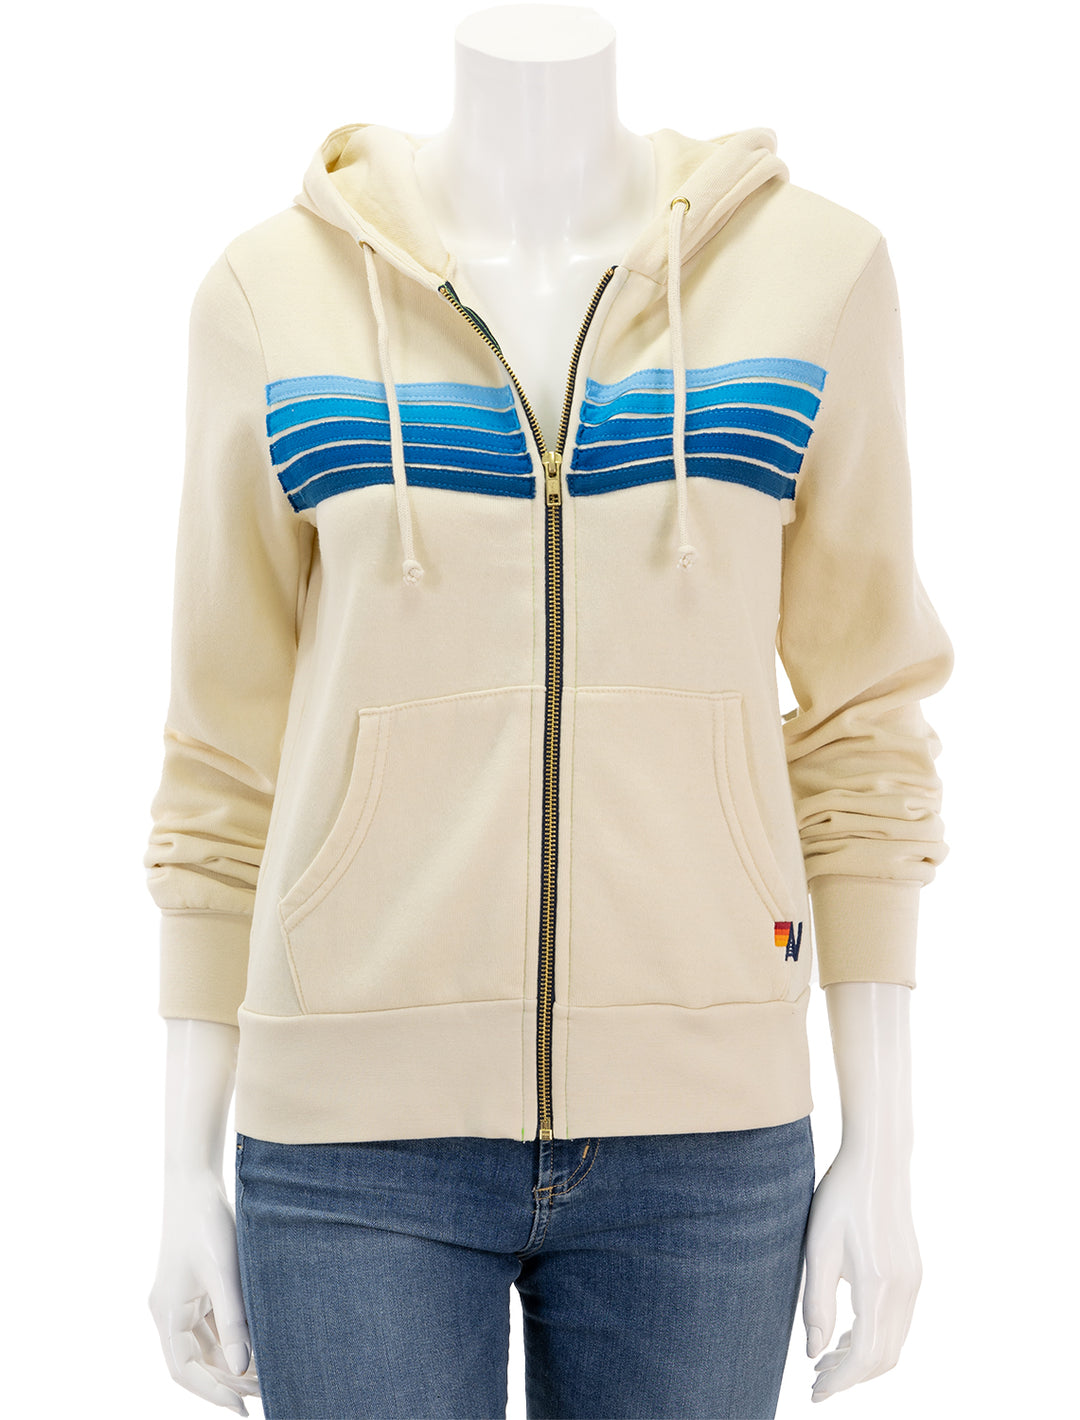 Front view of Aviator Nation's 5 stripe zip hoodie in vintage white and blue.